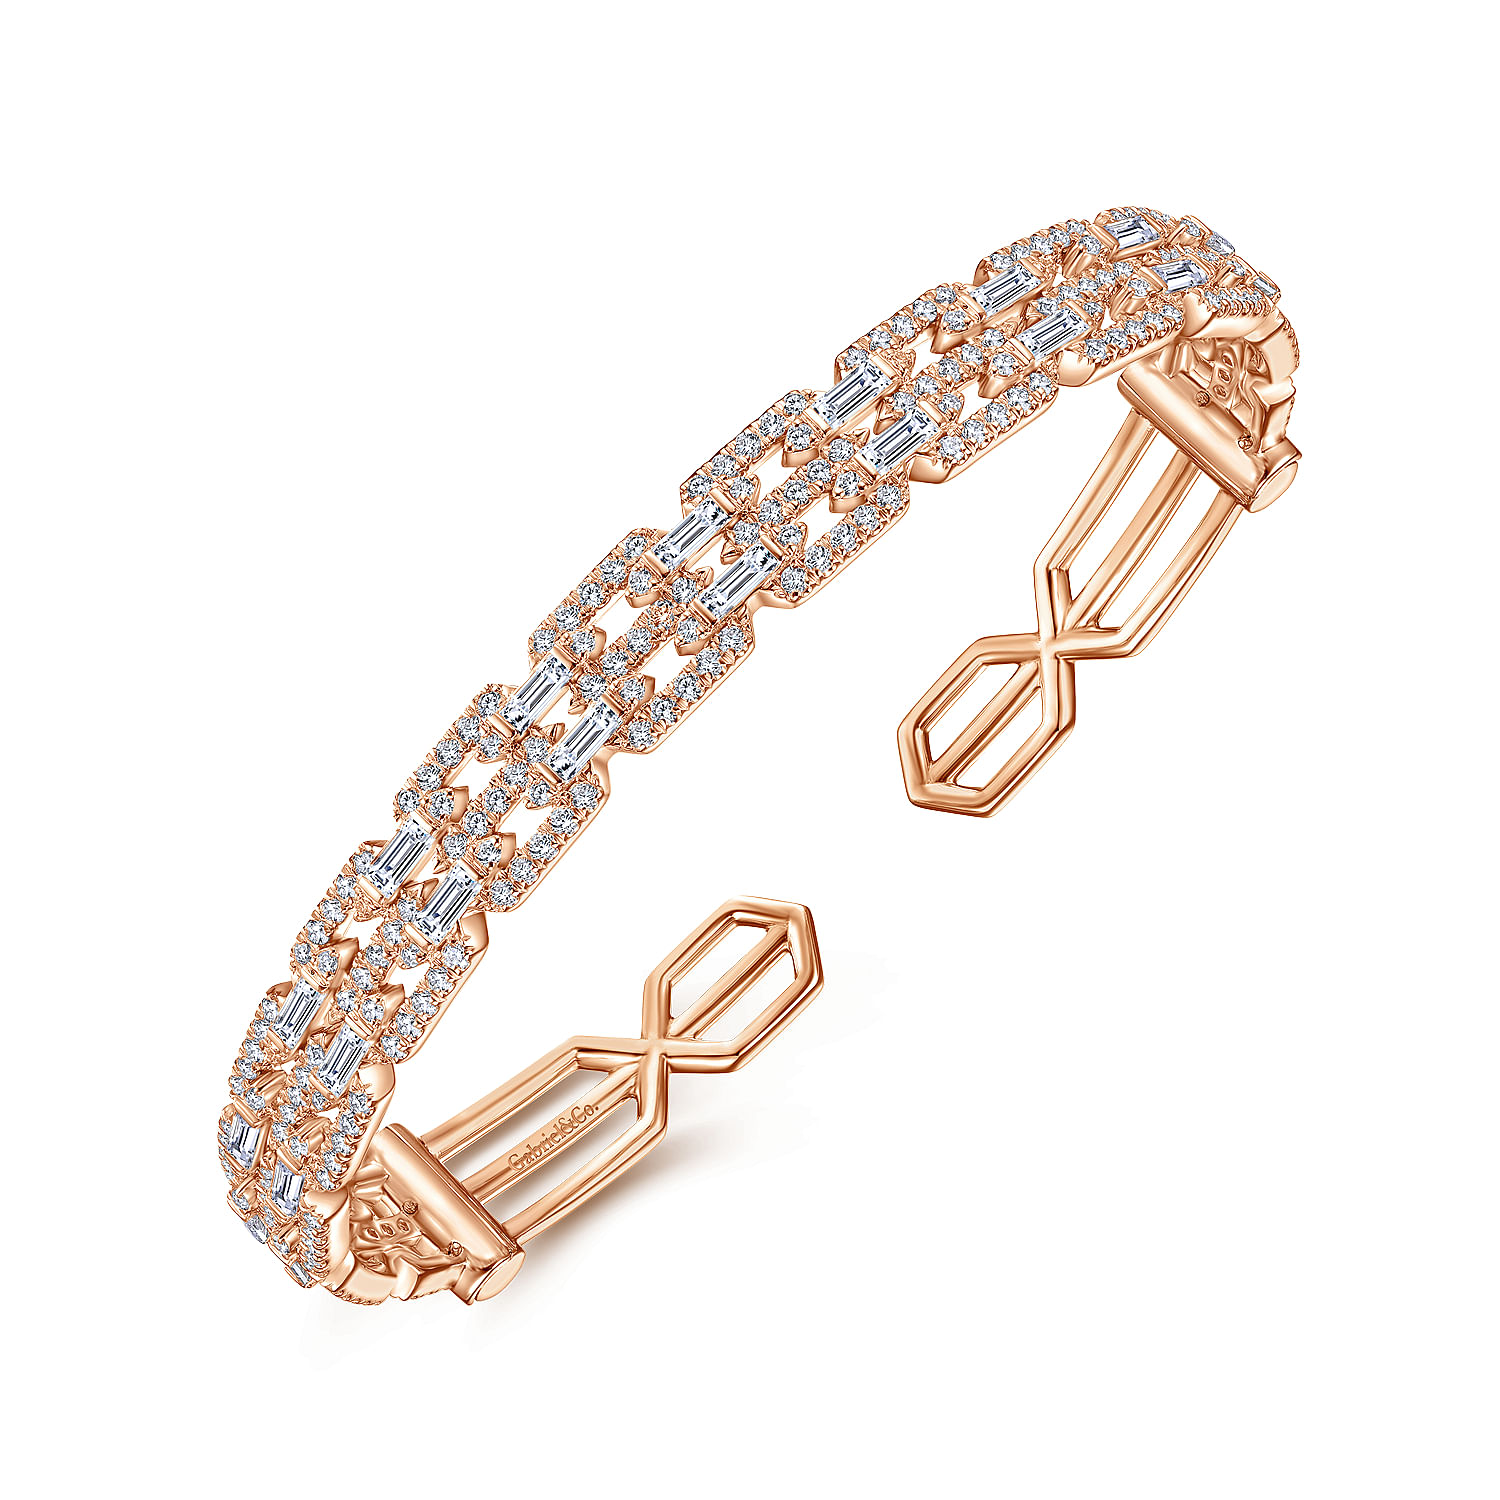 14K Rose Gold Diamond Chain Link Cuff Bracelet with Diamond Baguette Spacers